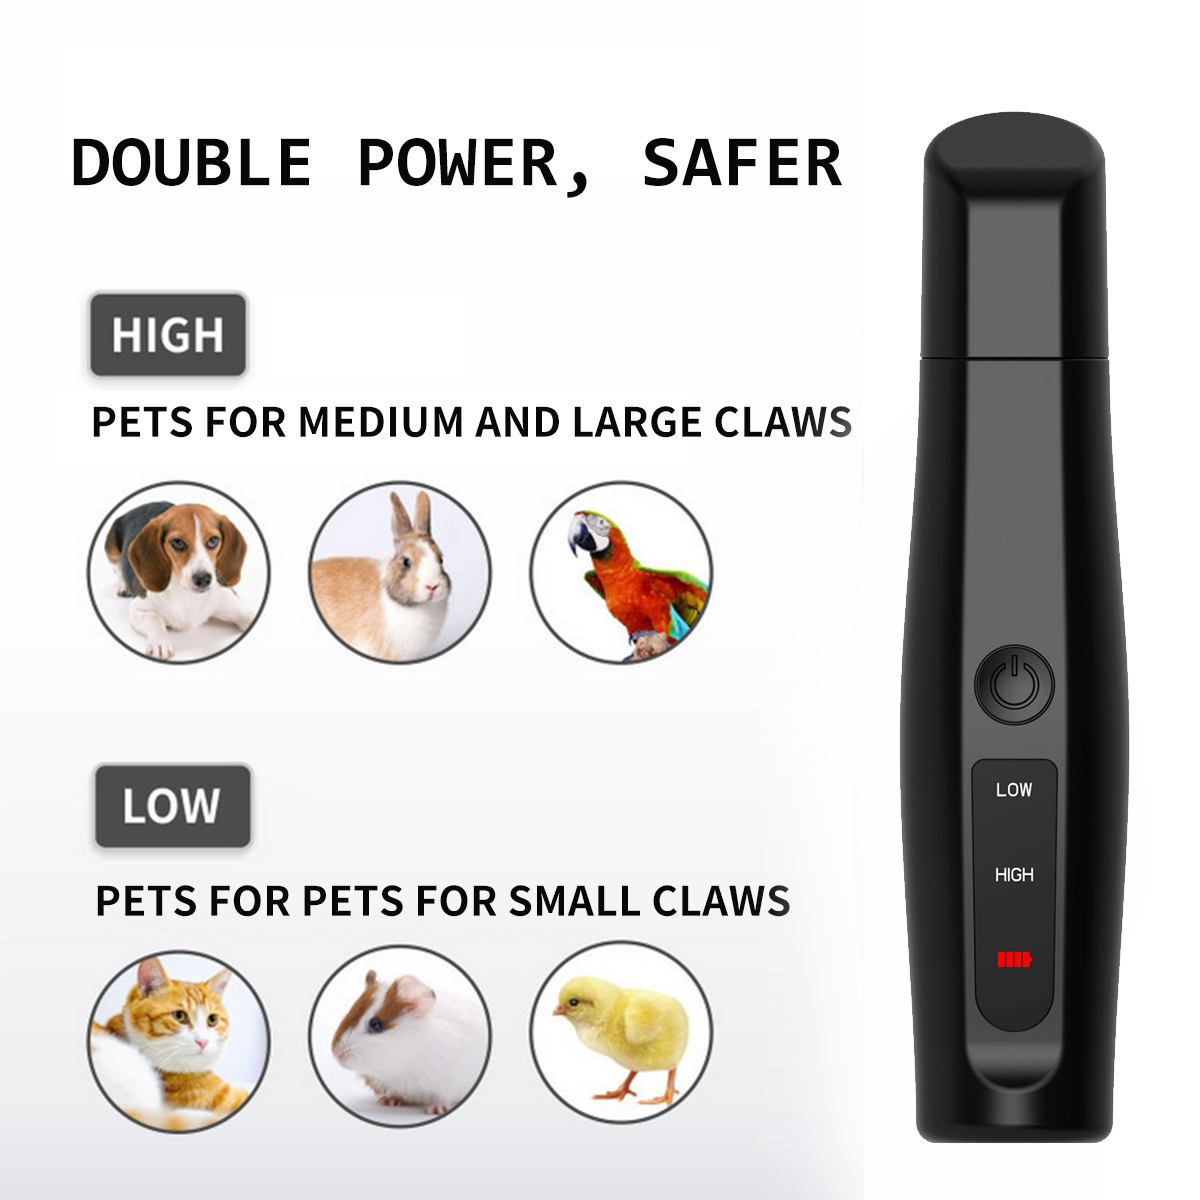 USB Charging Dog Nail Grinders Rechargeable Pet Nail Clippers Quiet Electric Dog Cat Paws Nail Grooming Trimmer Tools